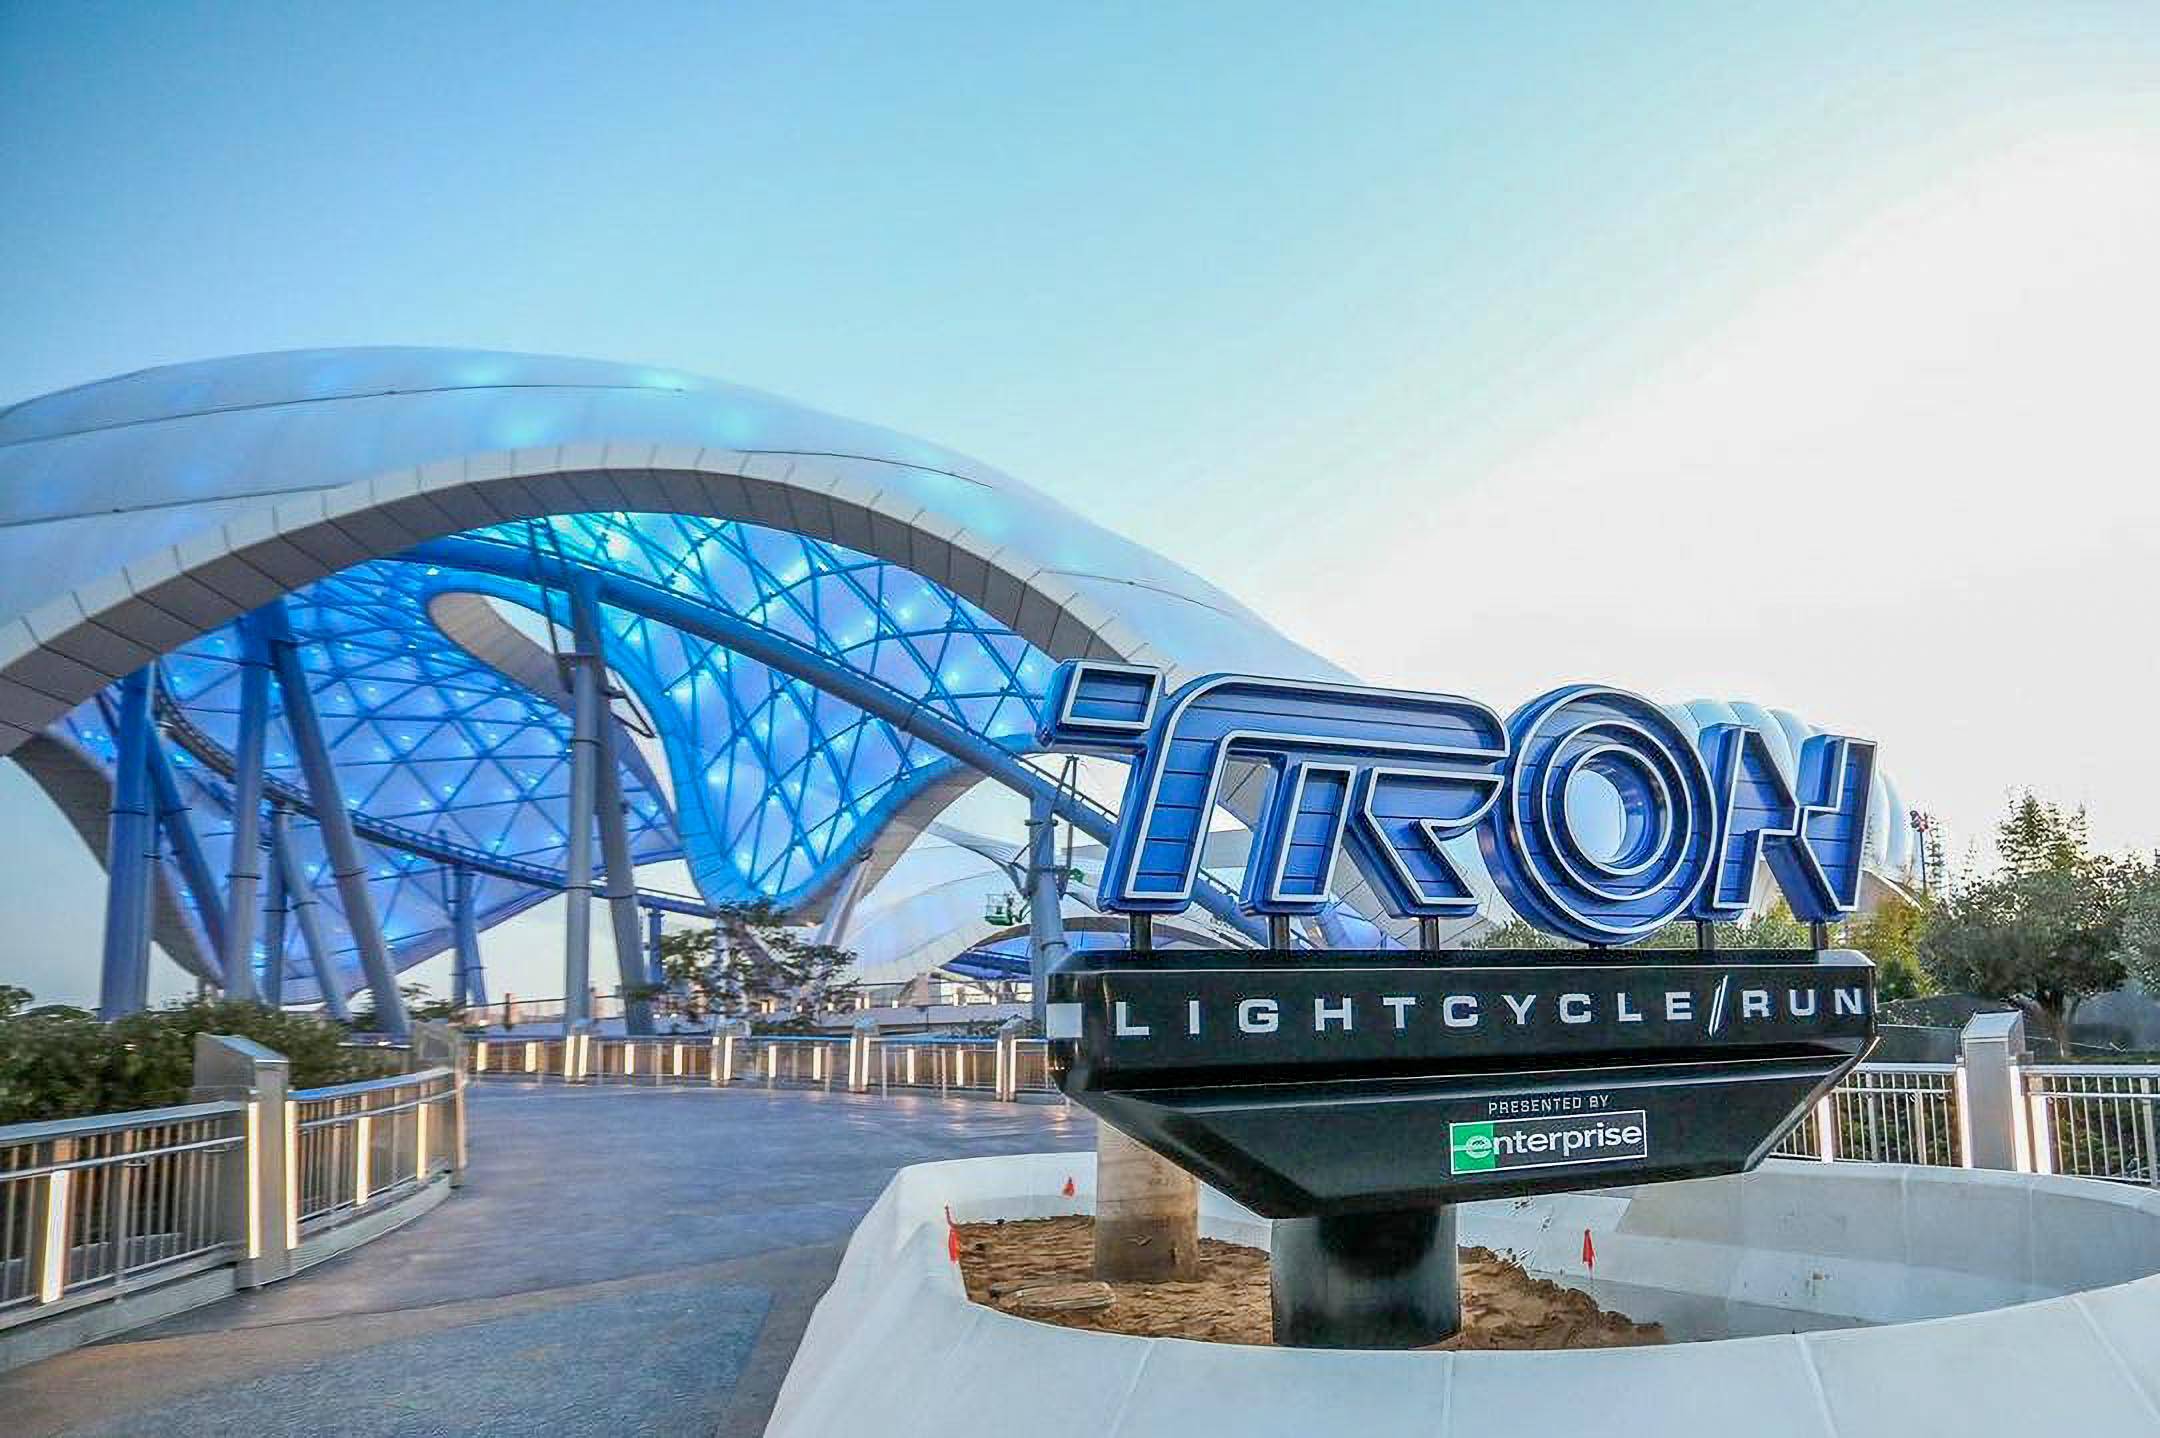 Access to Magic Kingdom will be restricted during the preview period for TRON Lightcycle Run beginning March 4